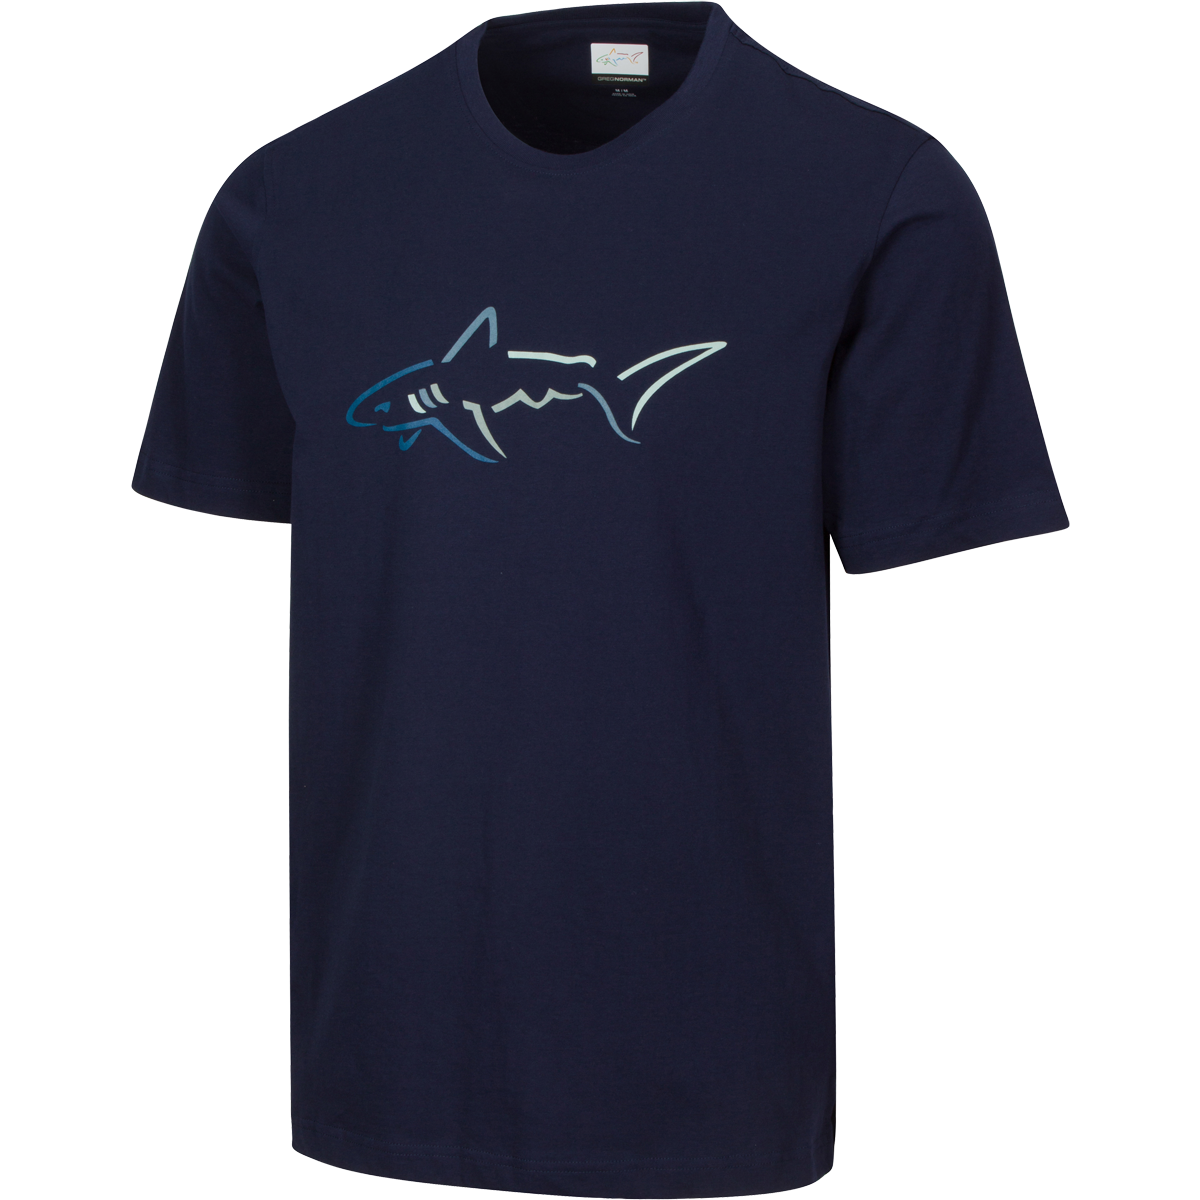 Image of Limited Edition Cotton Shark T-Shirt